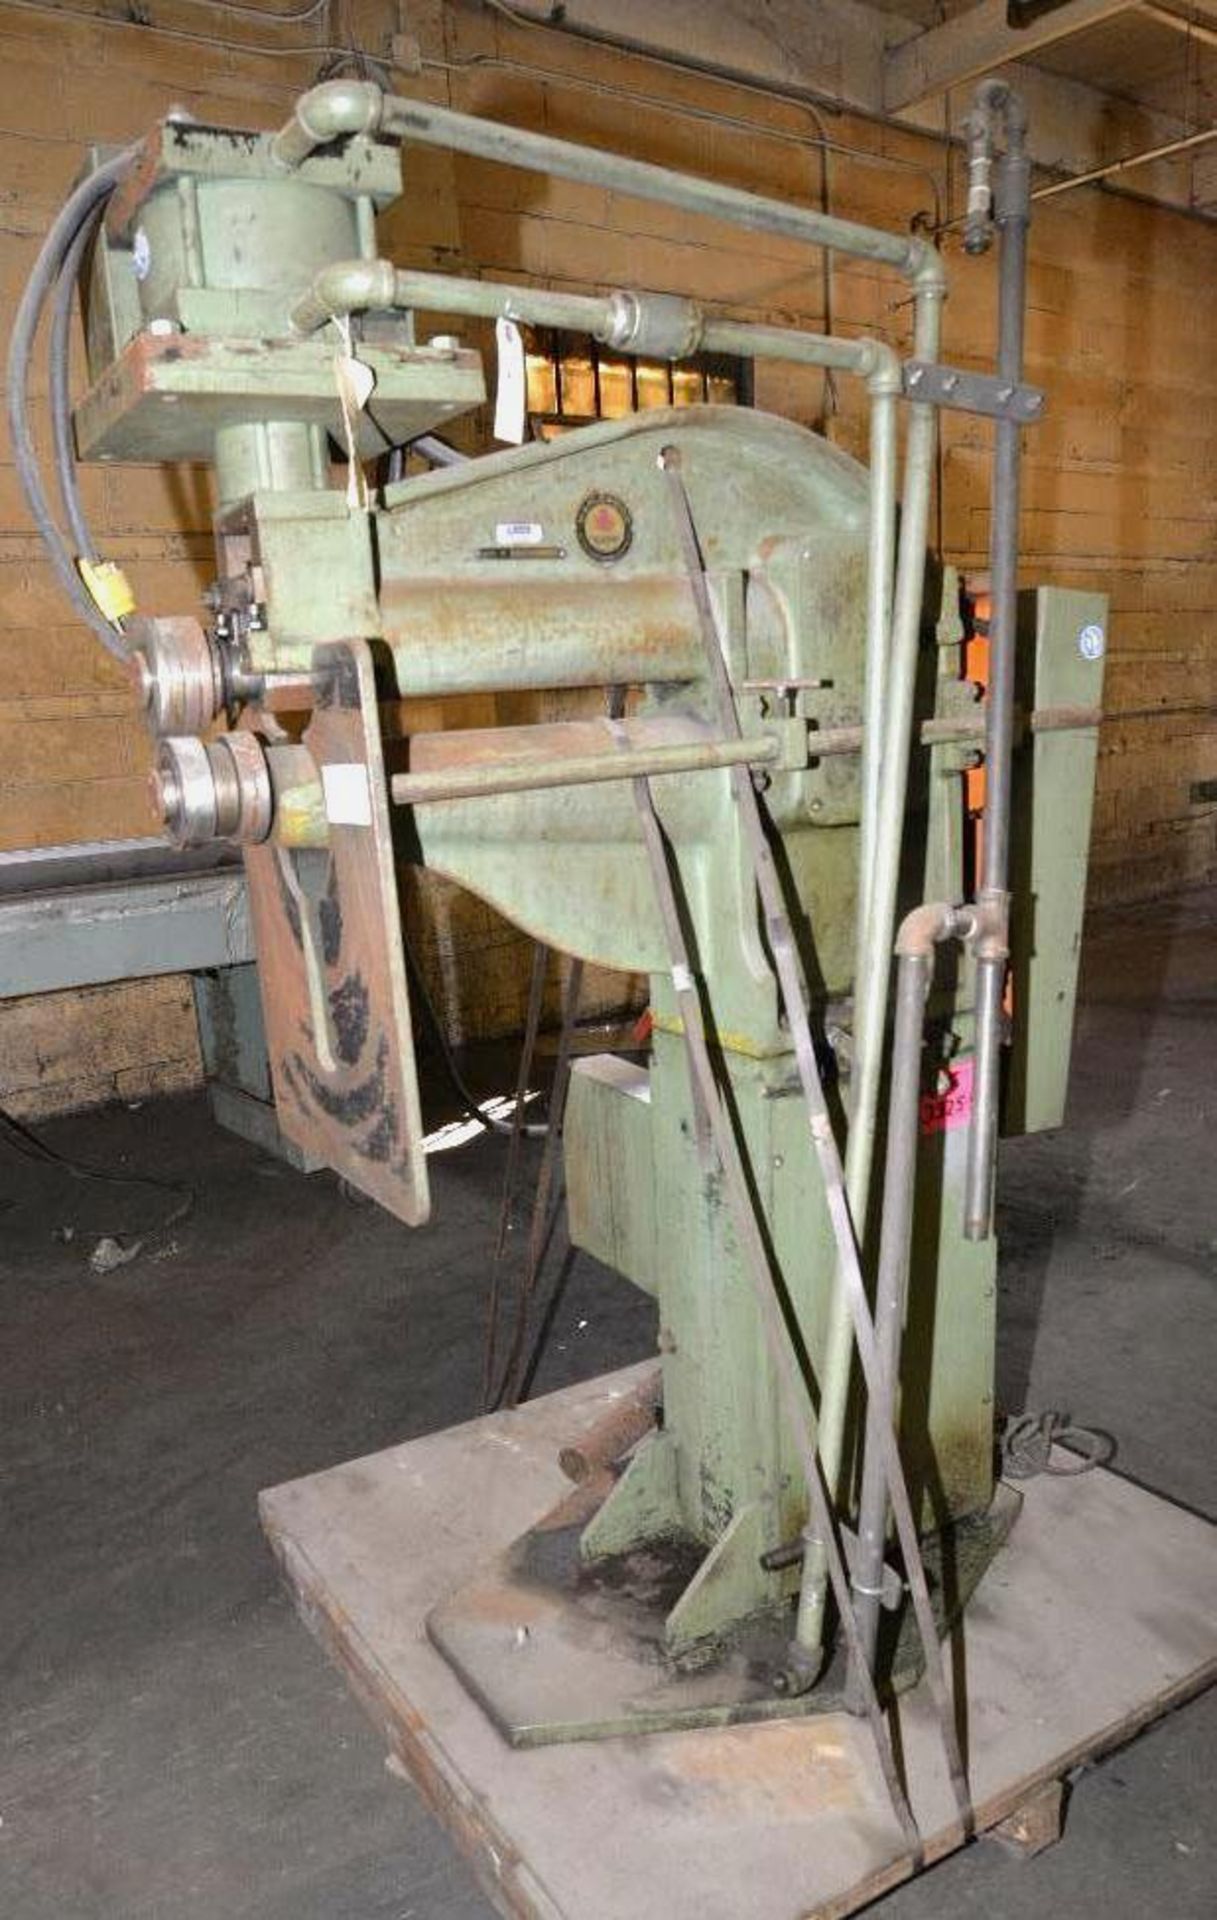 MAPLEWOOD ROLL FORMING MACHINE CO. ROTARY MACHINE S/N 3325-520-P - 230 VOLTS